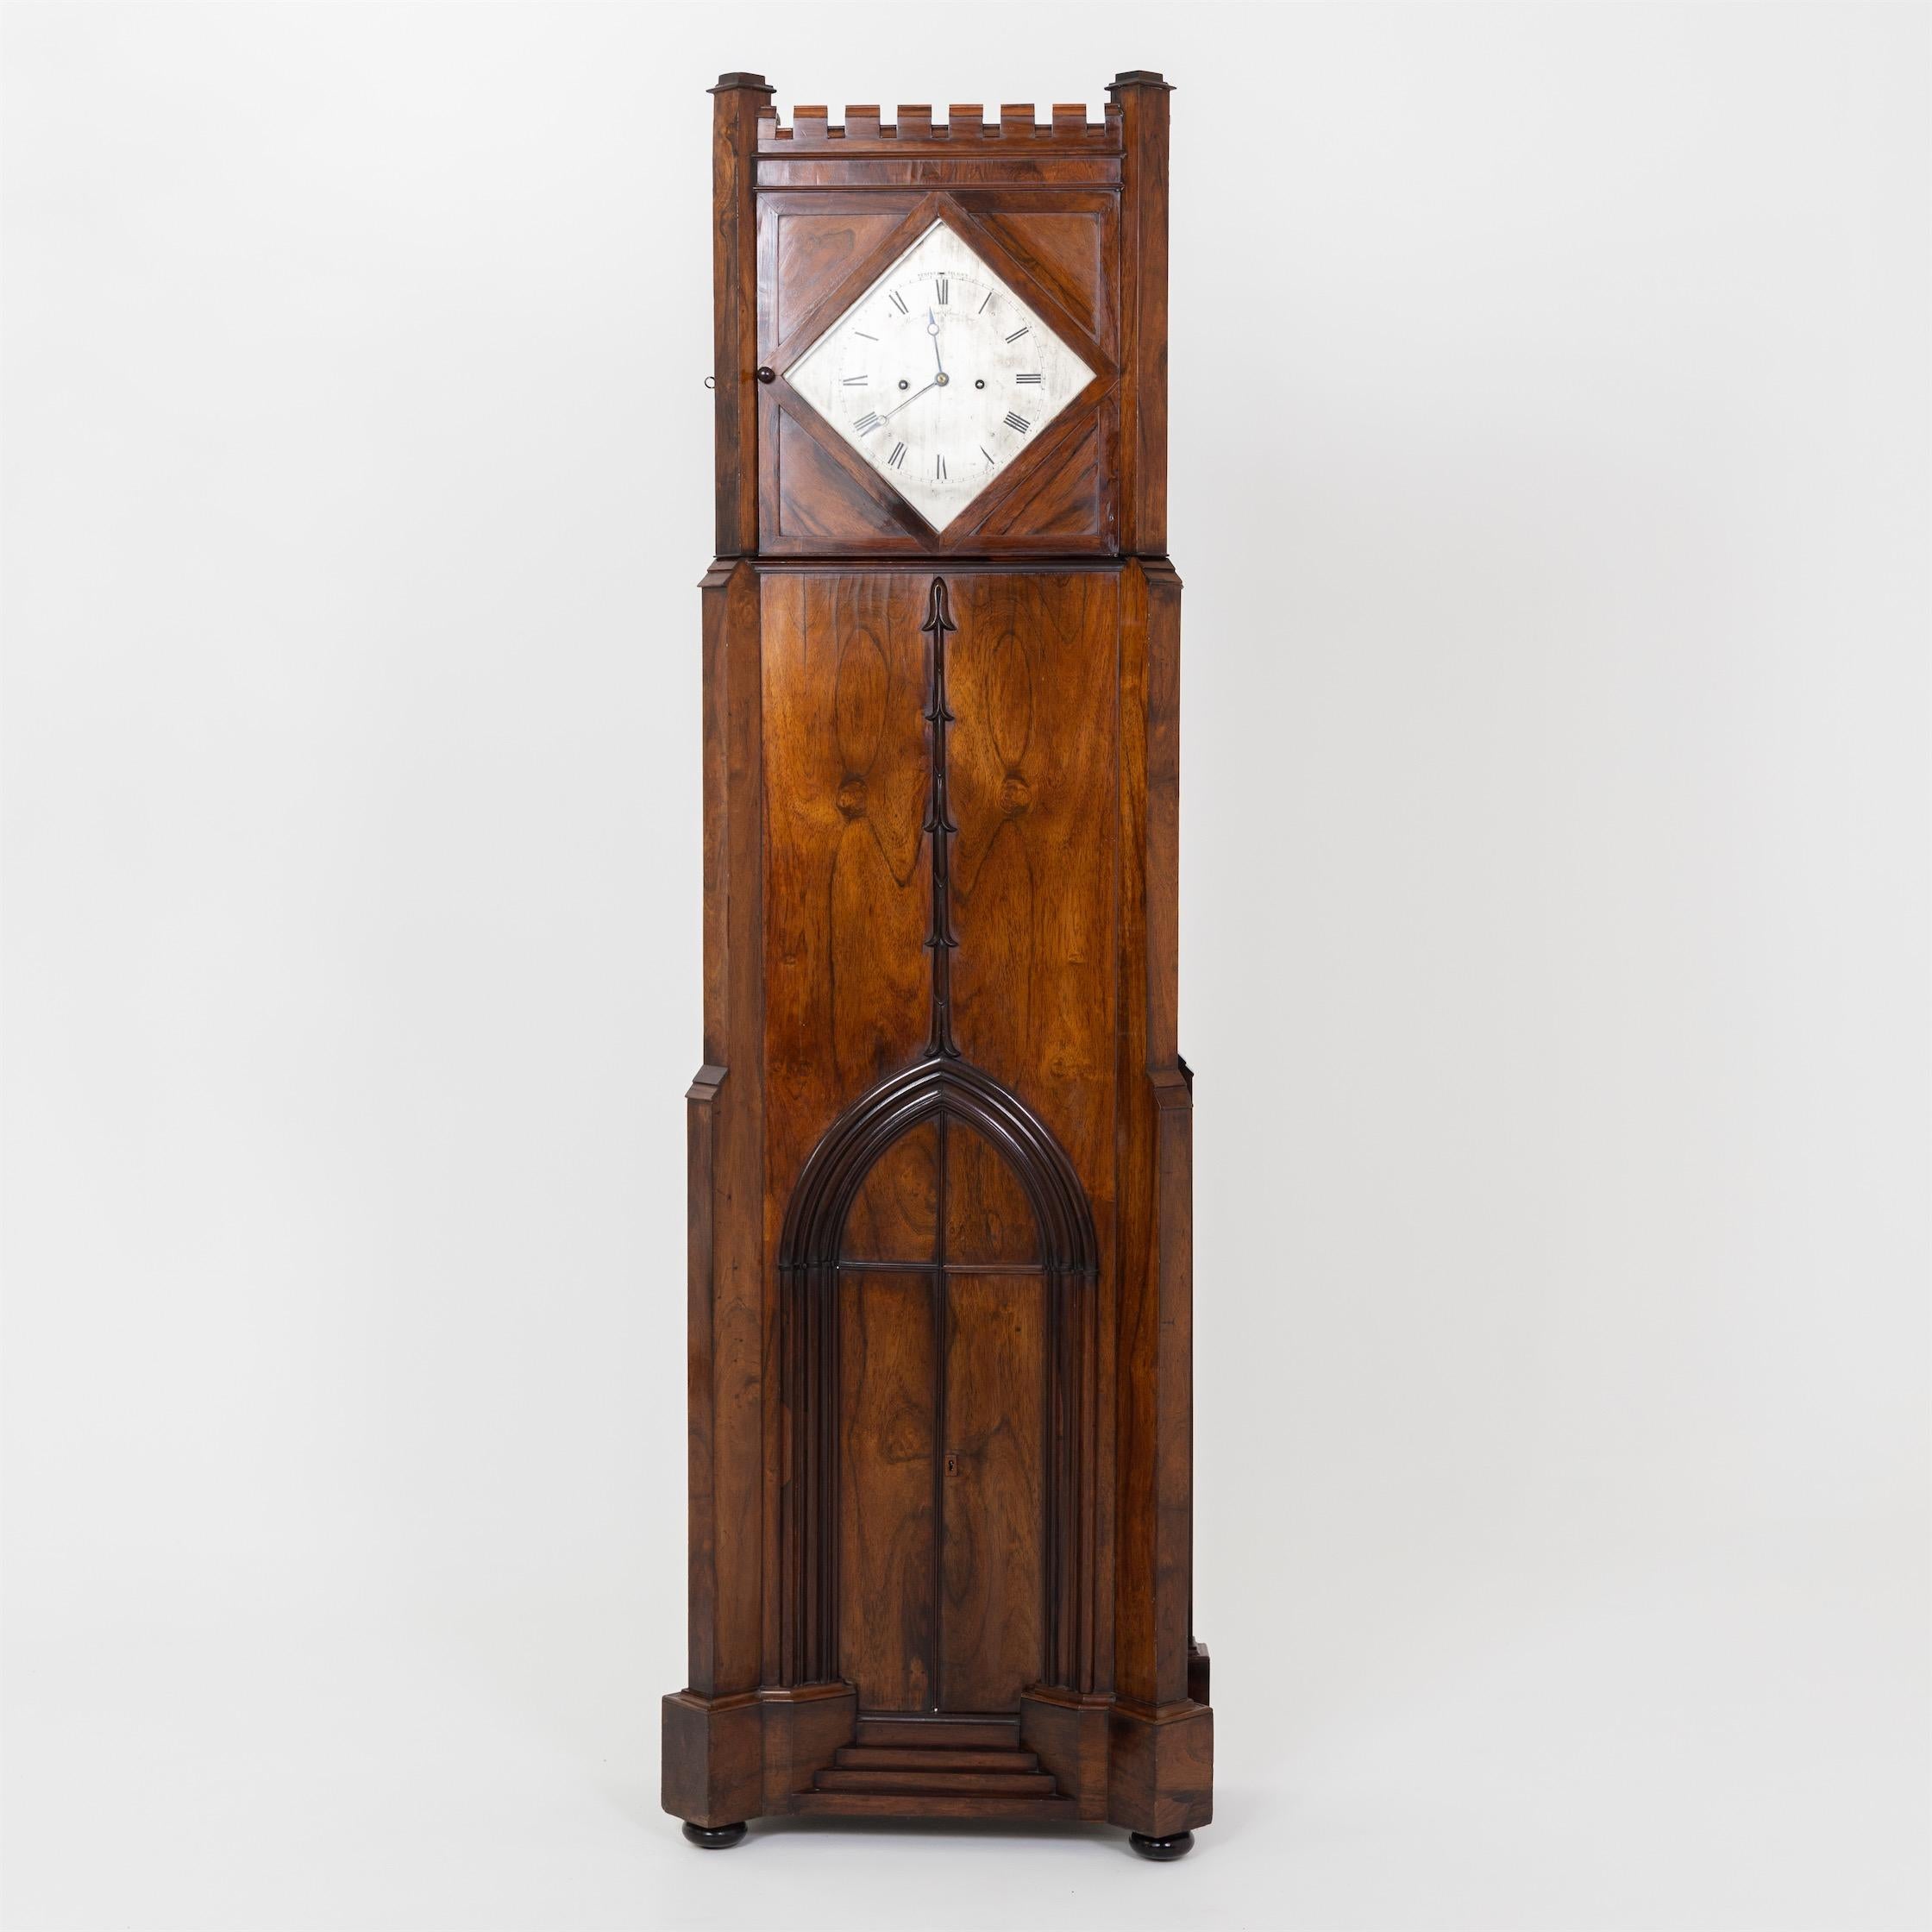 Large tower-shaped grandfather clock with crenellations and openwork tracery windows on the sides, second half of the 19th century. The diamond-shaped window reveals the clock face with Roman numerals, inscribed “Payne 163 New Bond Street”. Payne &